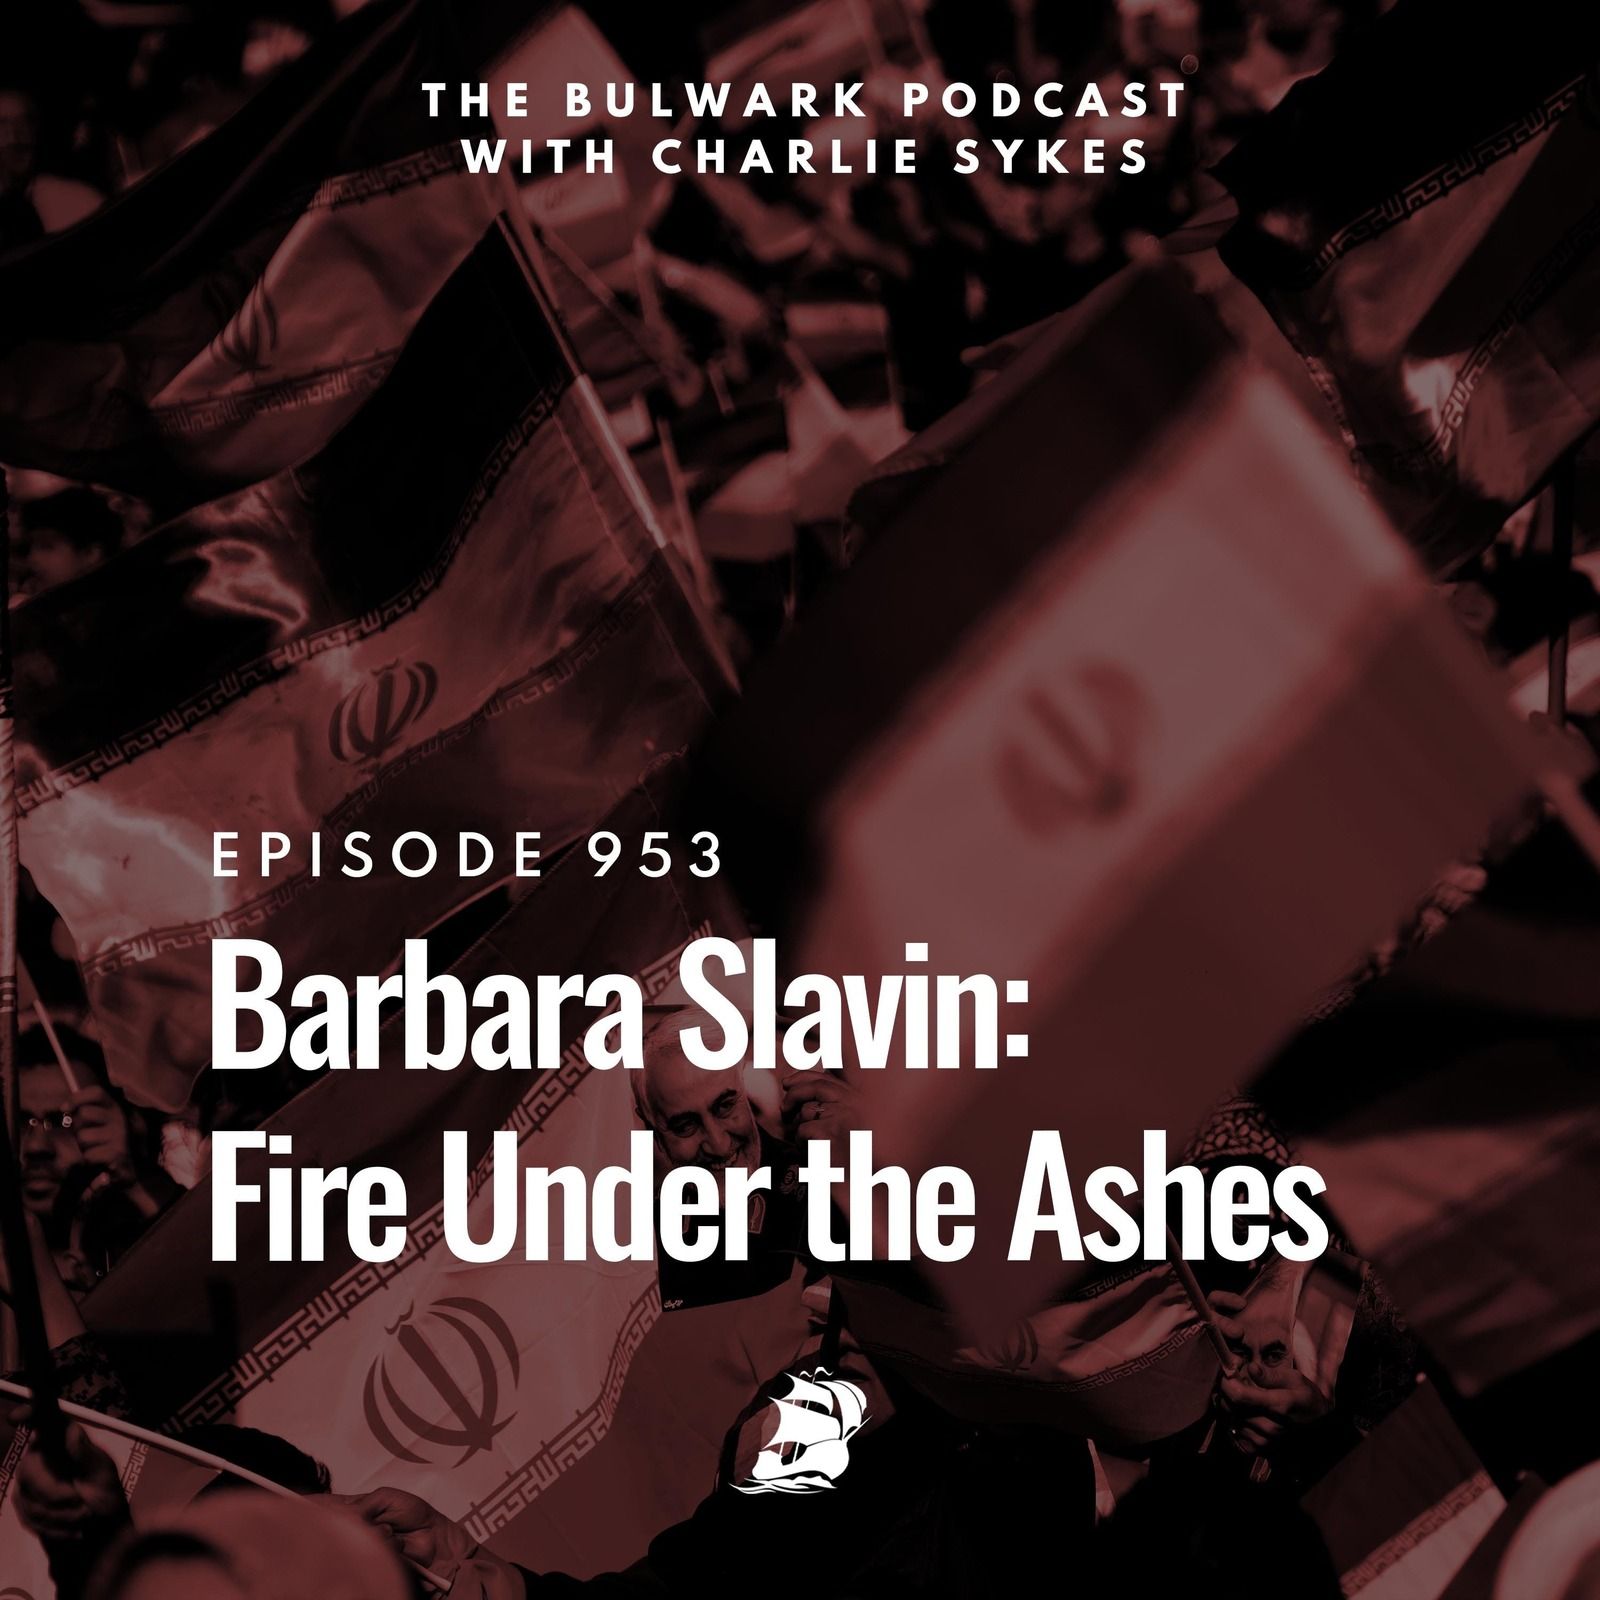 Barbara Slavin: Fire Under the Ashes by The Bulwark Podcast